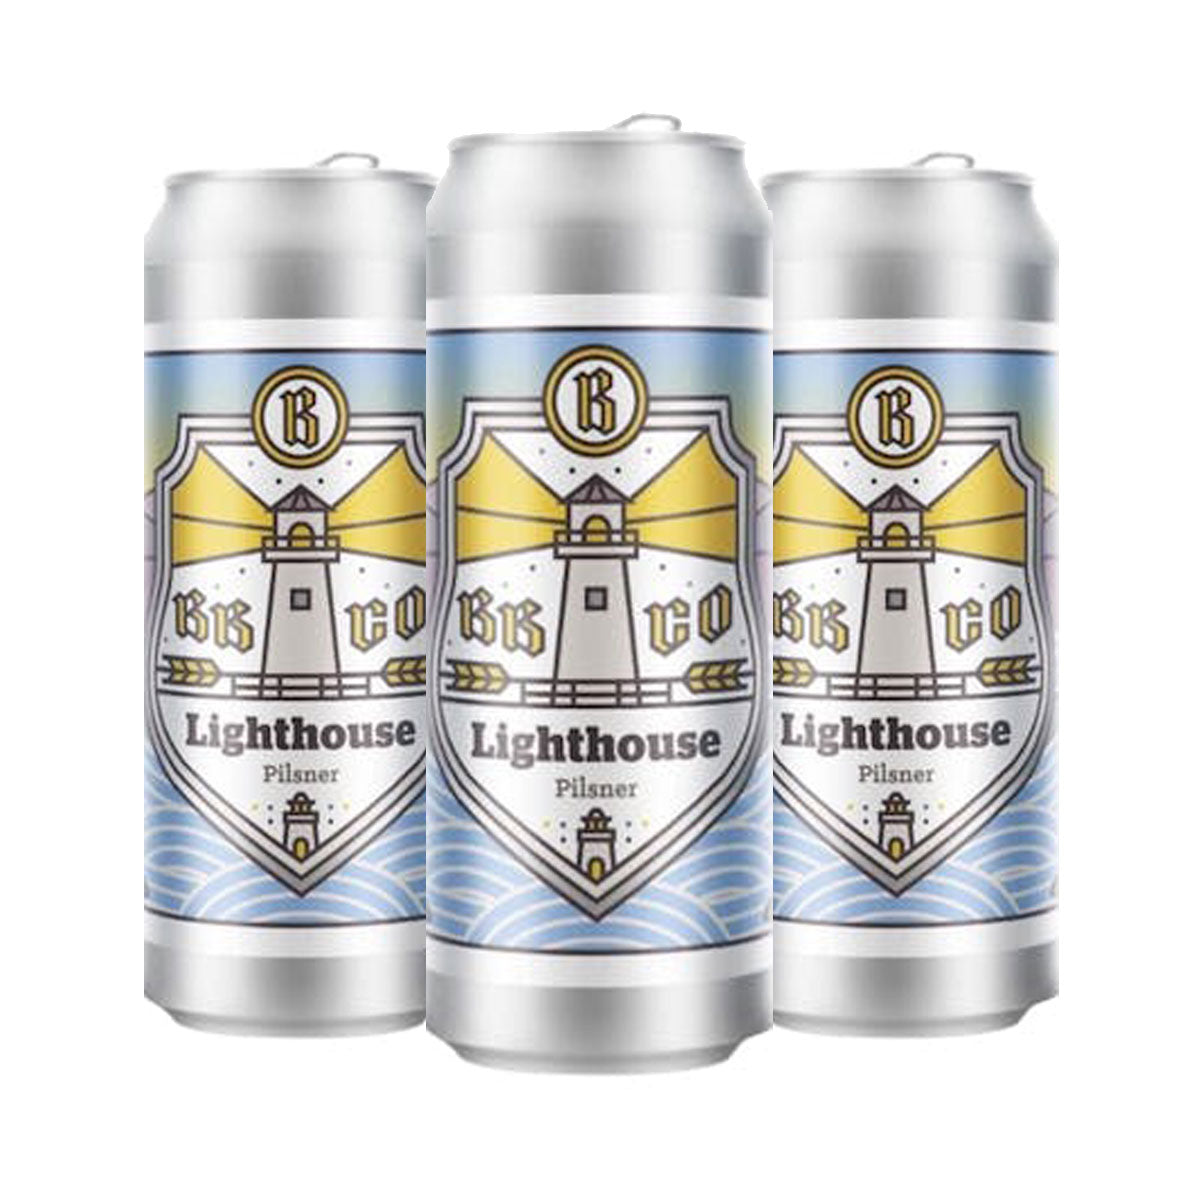 TAG Liquor Stores BC - Lighthouse Pilsner 6 Pack Cans